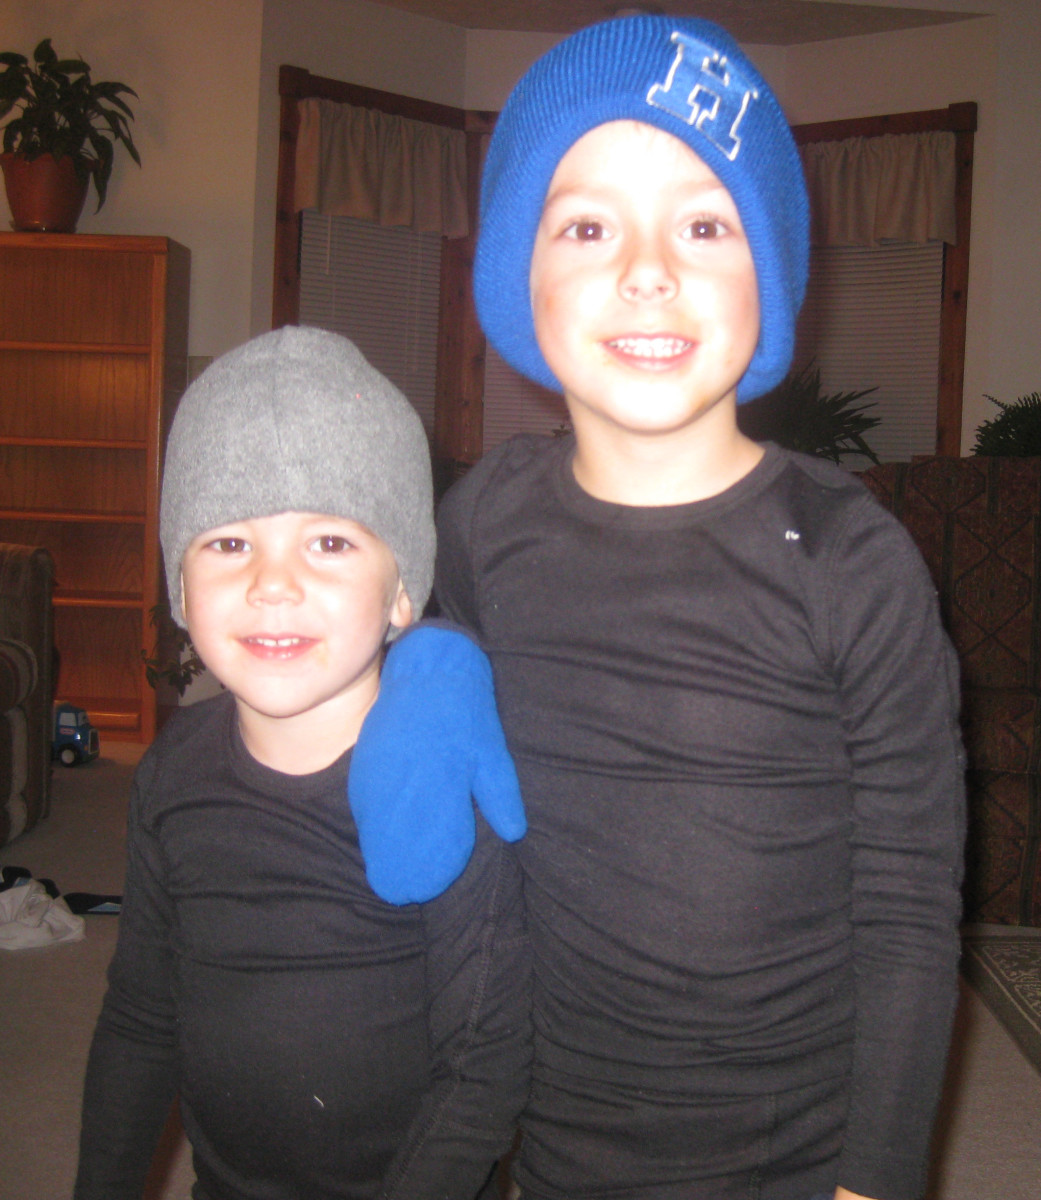 Johnny and Josh DiBlasio get ready to attend a Hilliard Davidson football game (photo courtesy of the DiBlasio family)